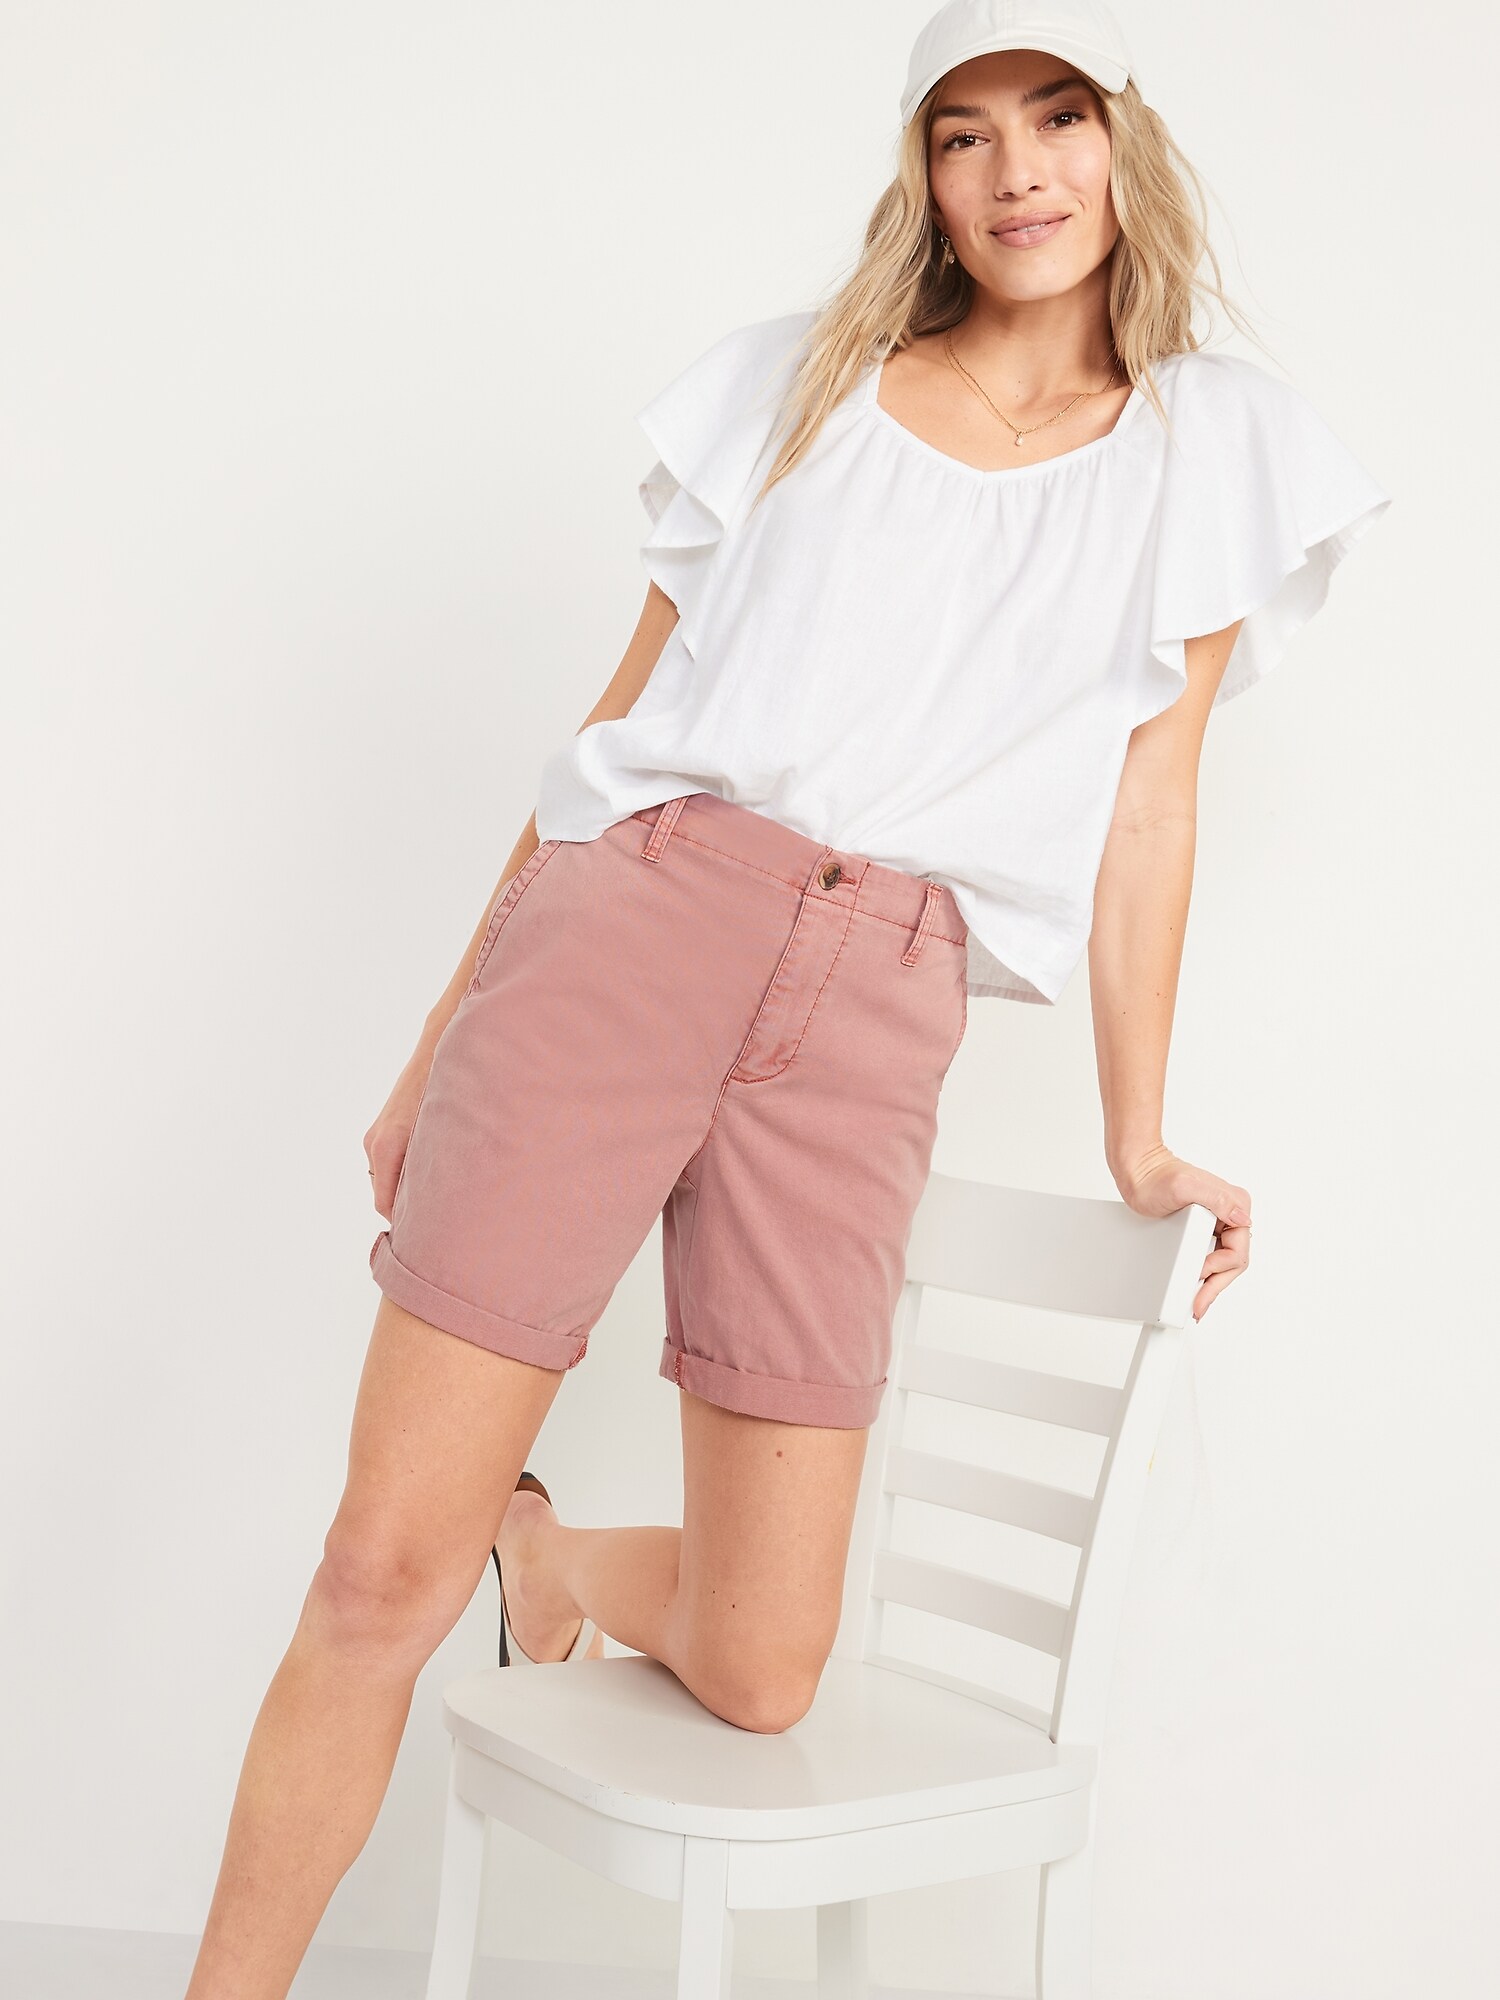 Old Navy Pure White Chino Shorts Women's Size 2 NWT 